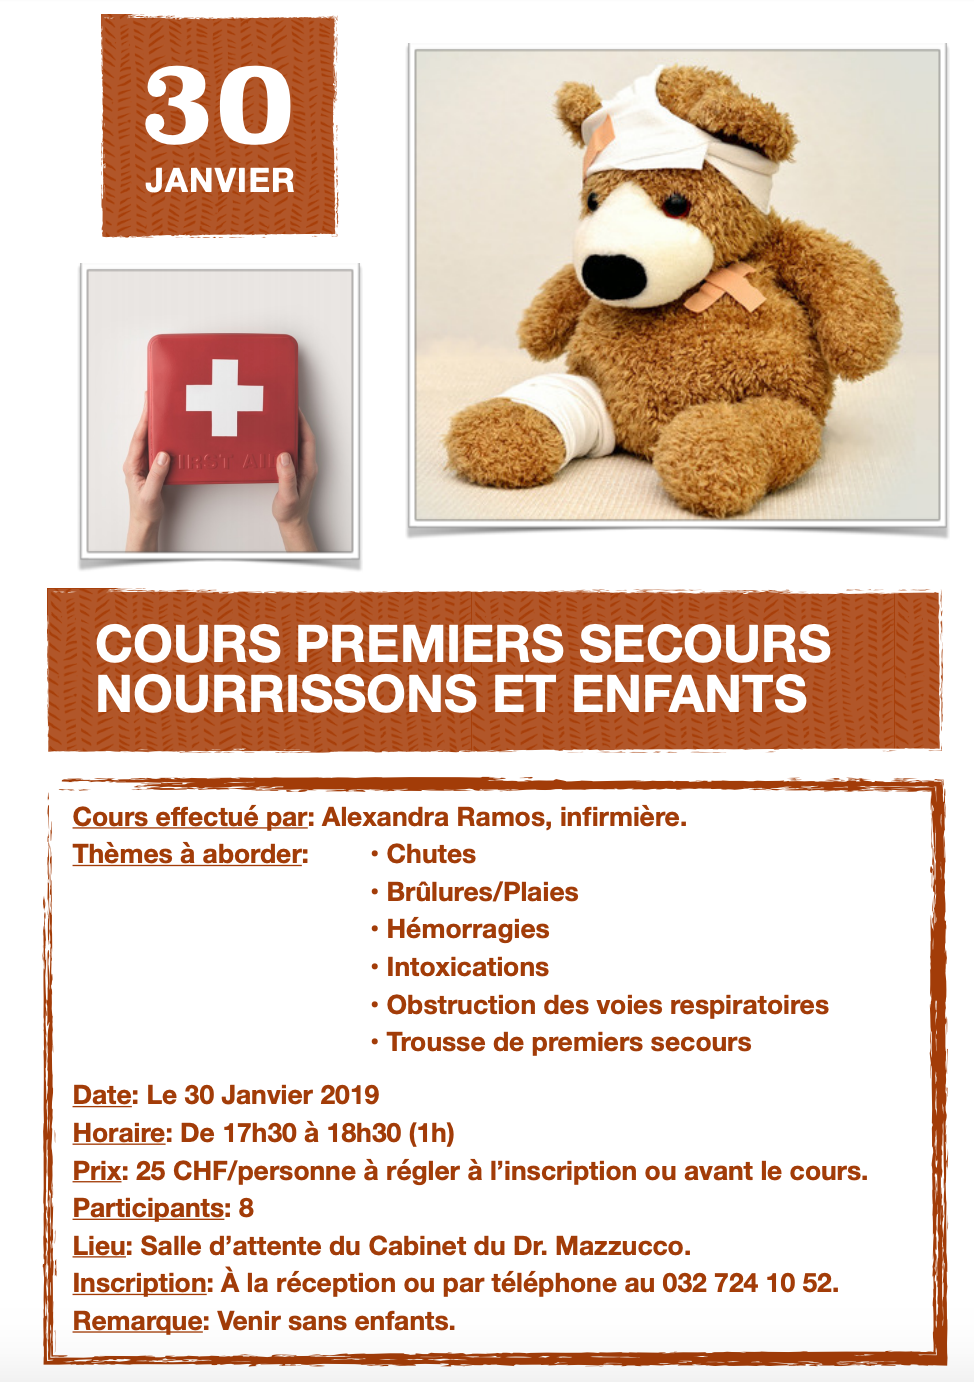 First aid course for children and infants